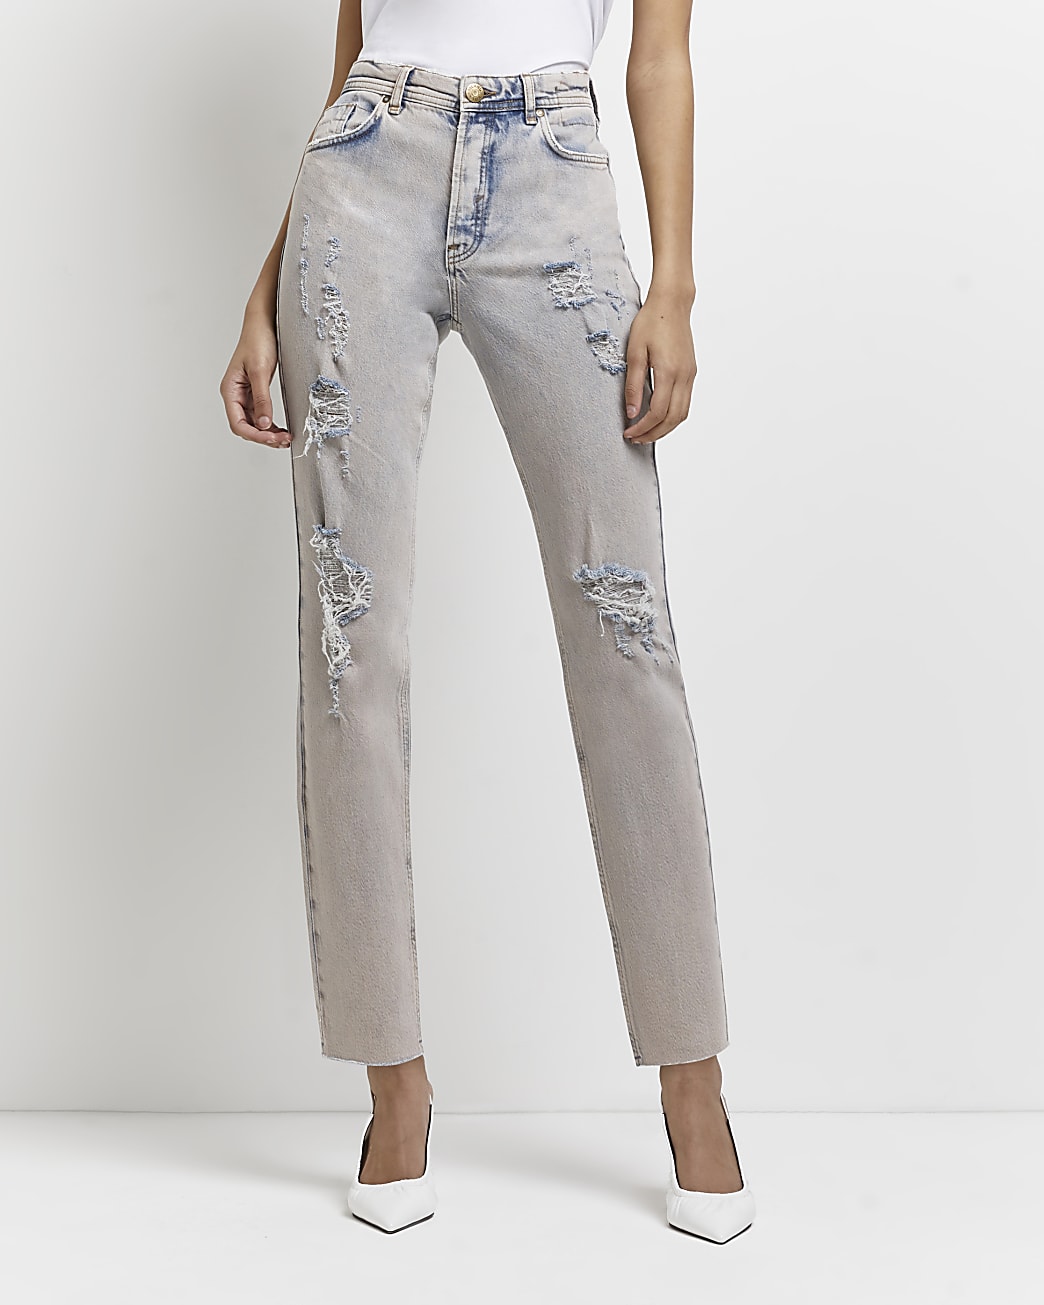 Pink ripped high waisted slim fit jeans, River Island